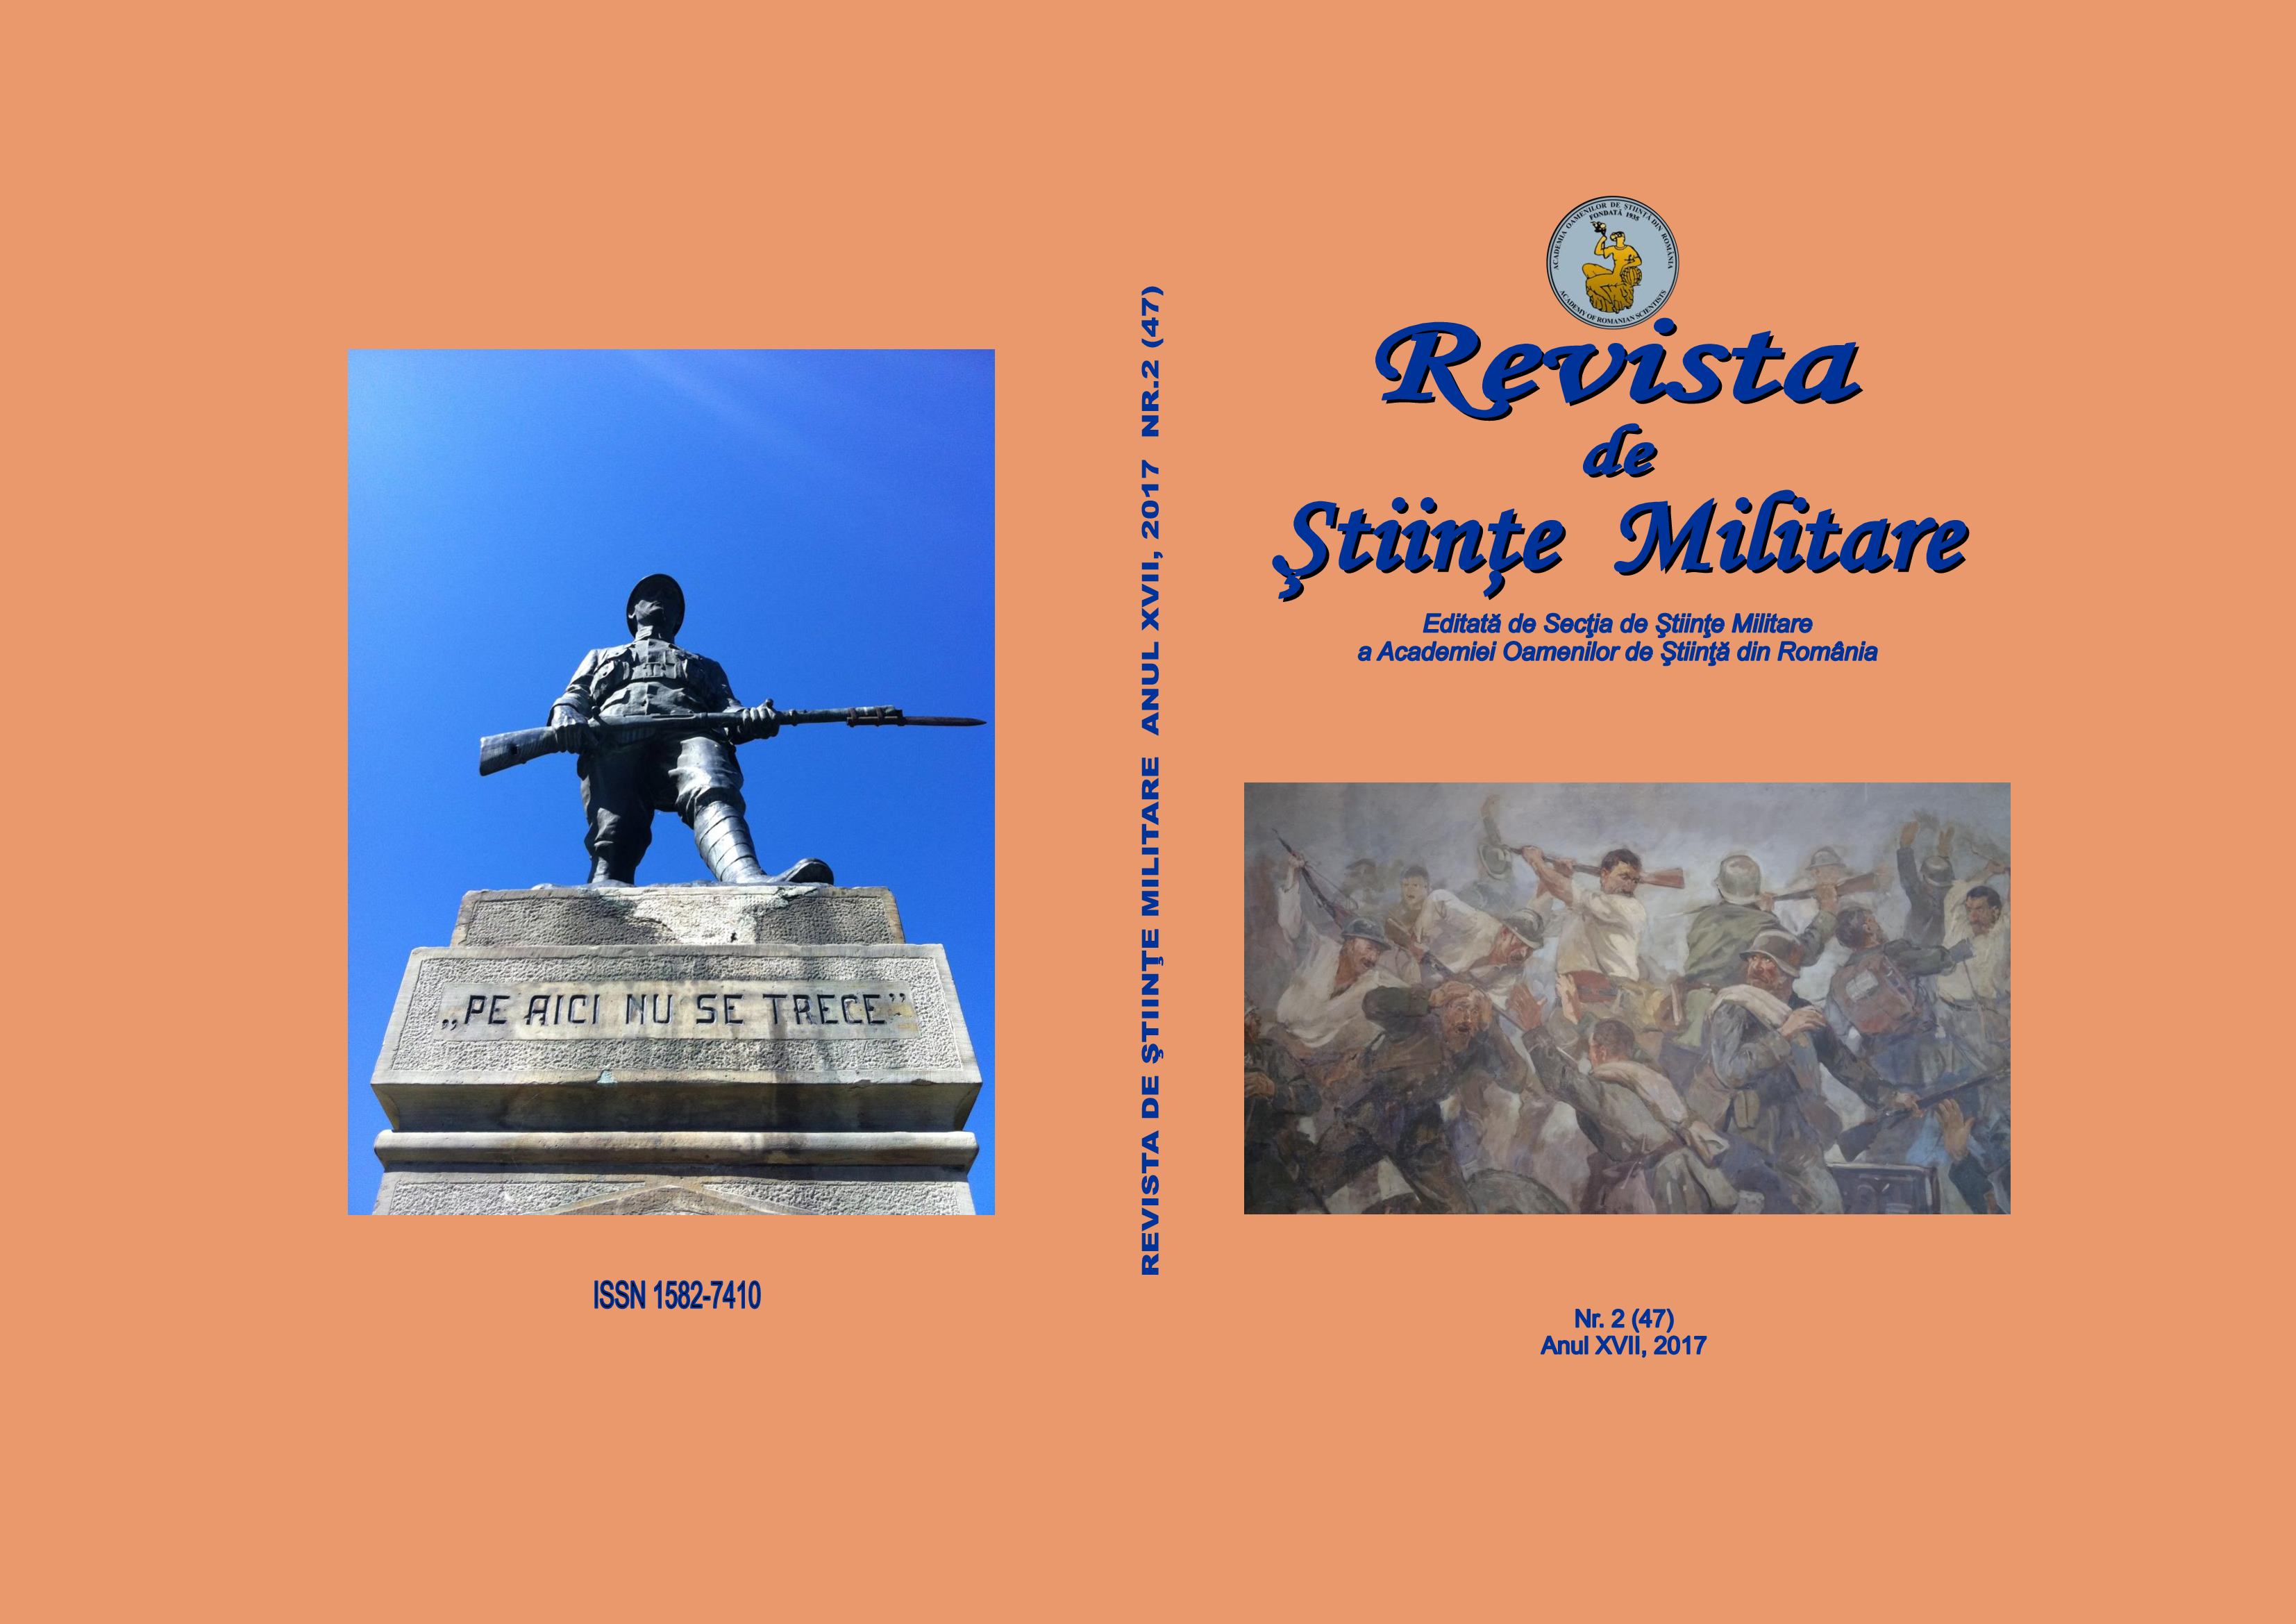 THE UNIFICATION IN 1918 – A MIRACLE CAME TRUE. THE ROLE OF MOLDOVAN SOLDIERS AND ROMANIAN ARMY Cover Image